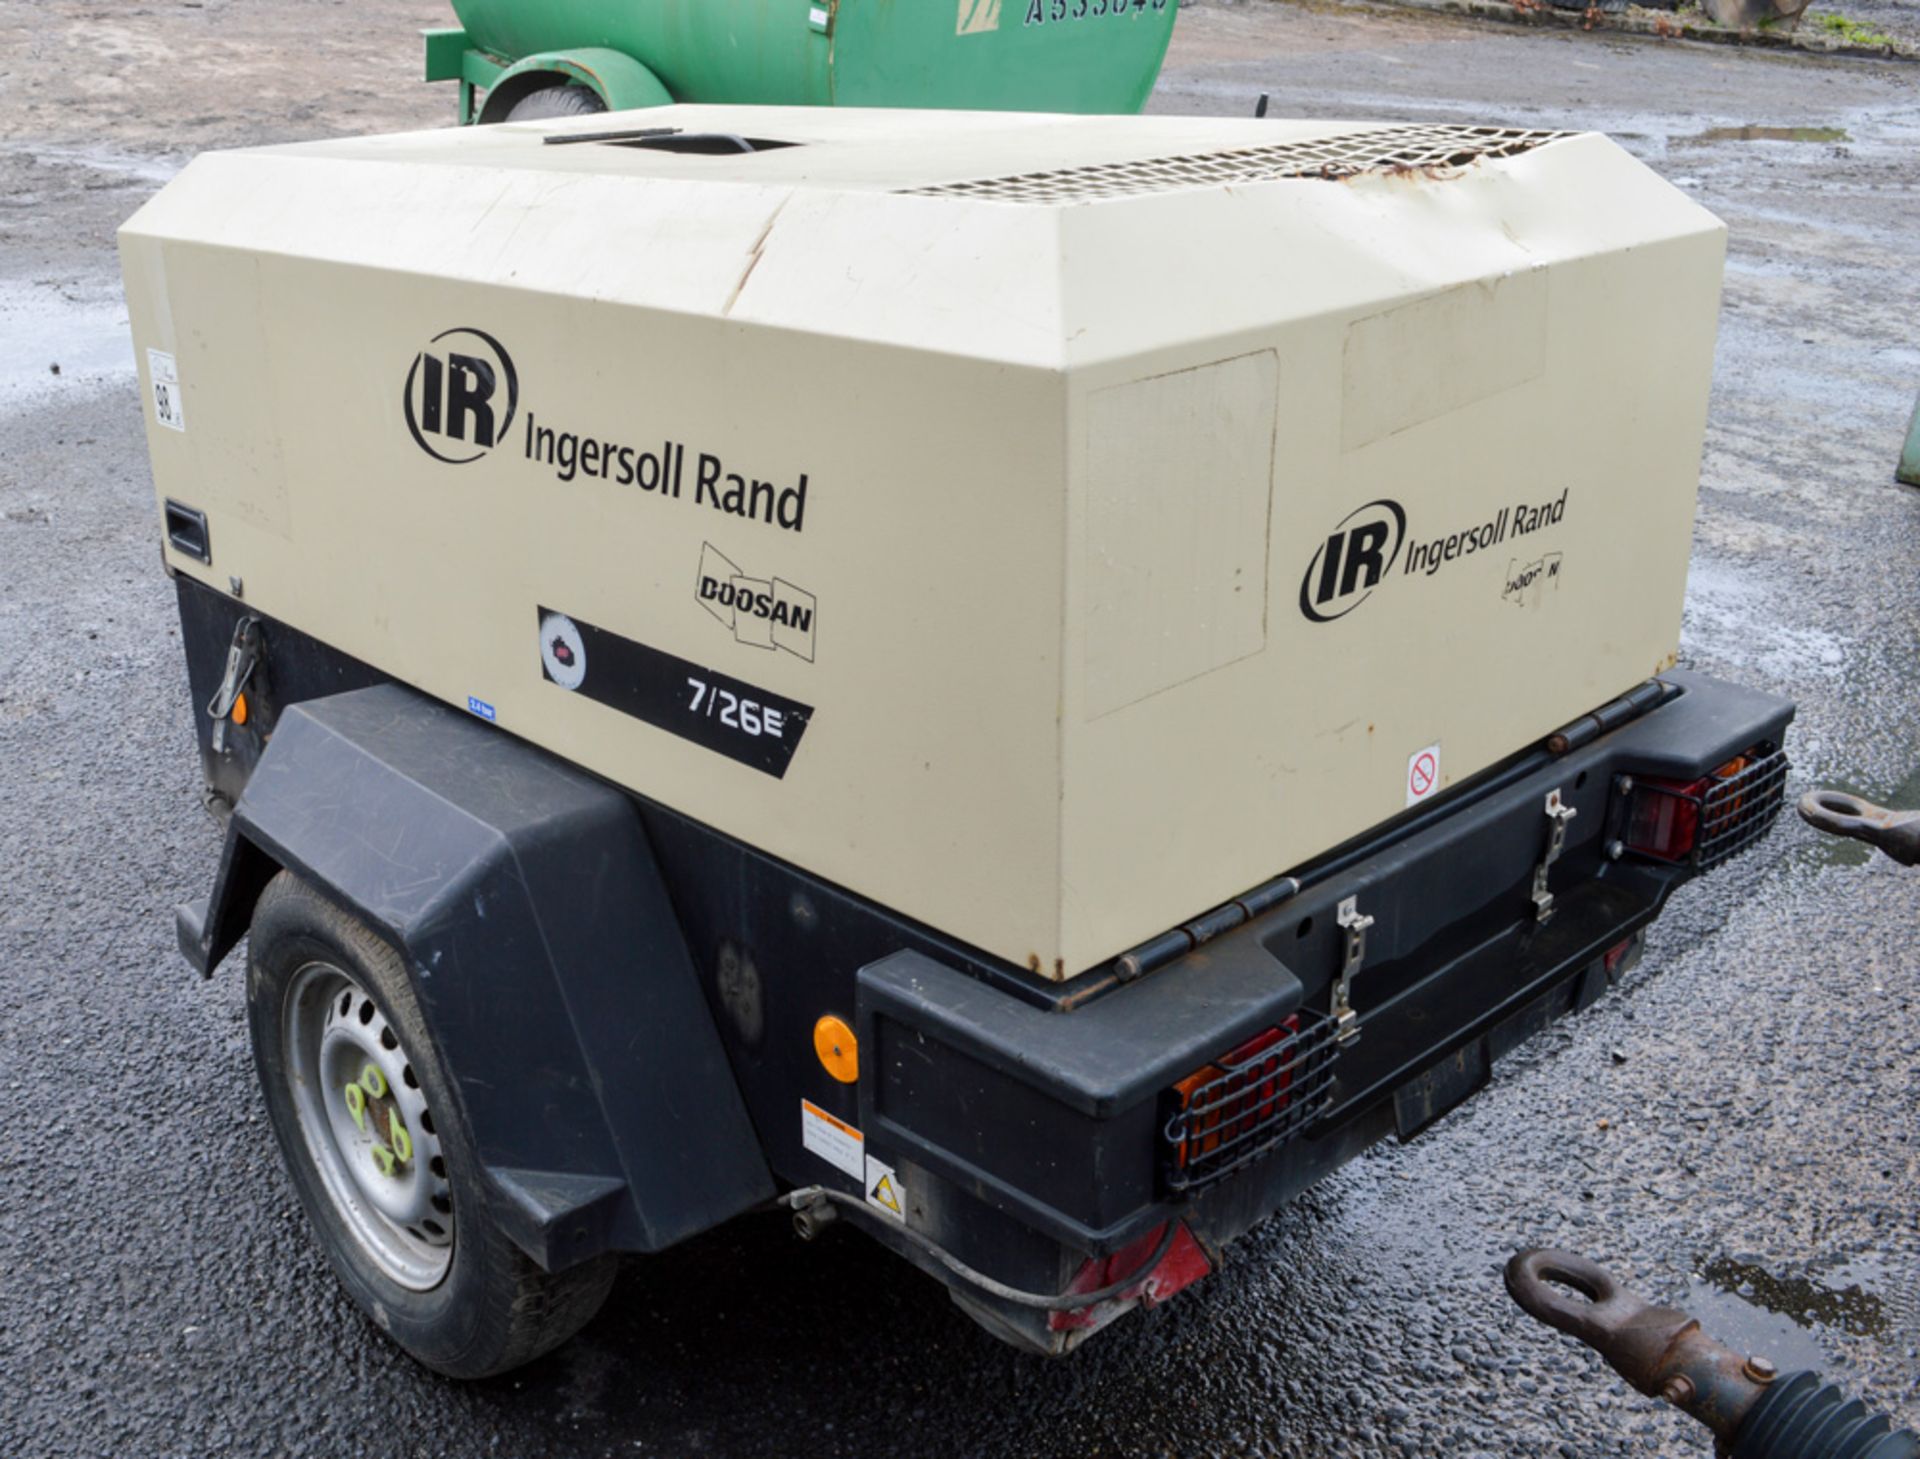 Ingersoll Rand 7/26E diesel driven mobile air compressor/generator Year: 2011 S/N: 108812 Recorded - Image 2 of 3